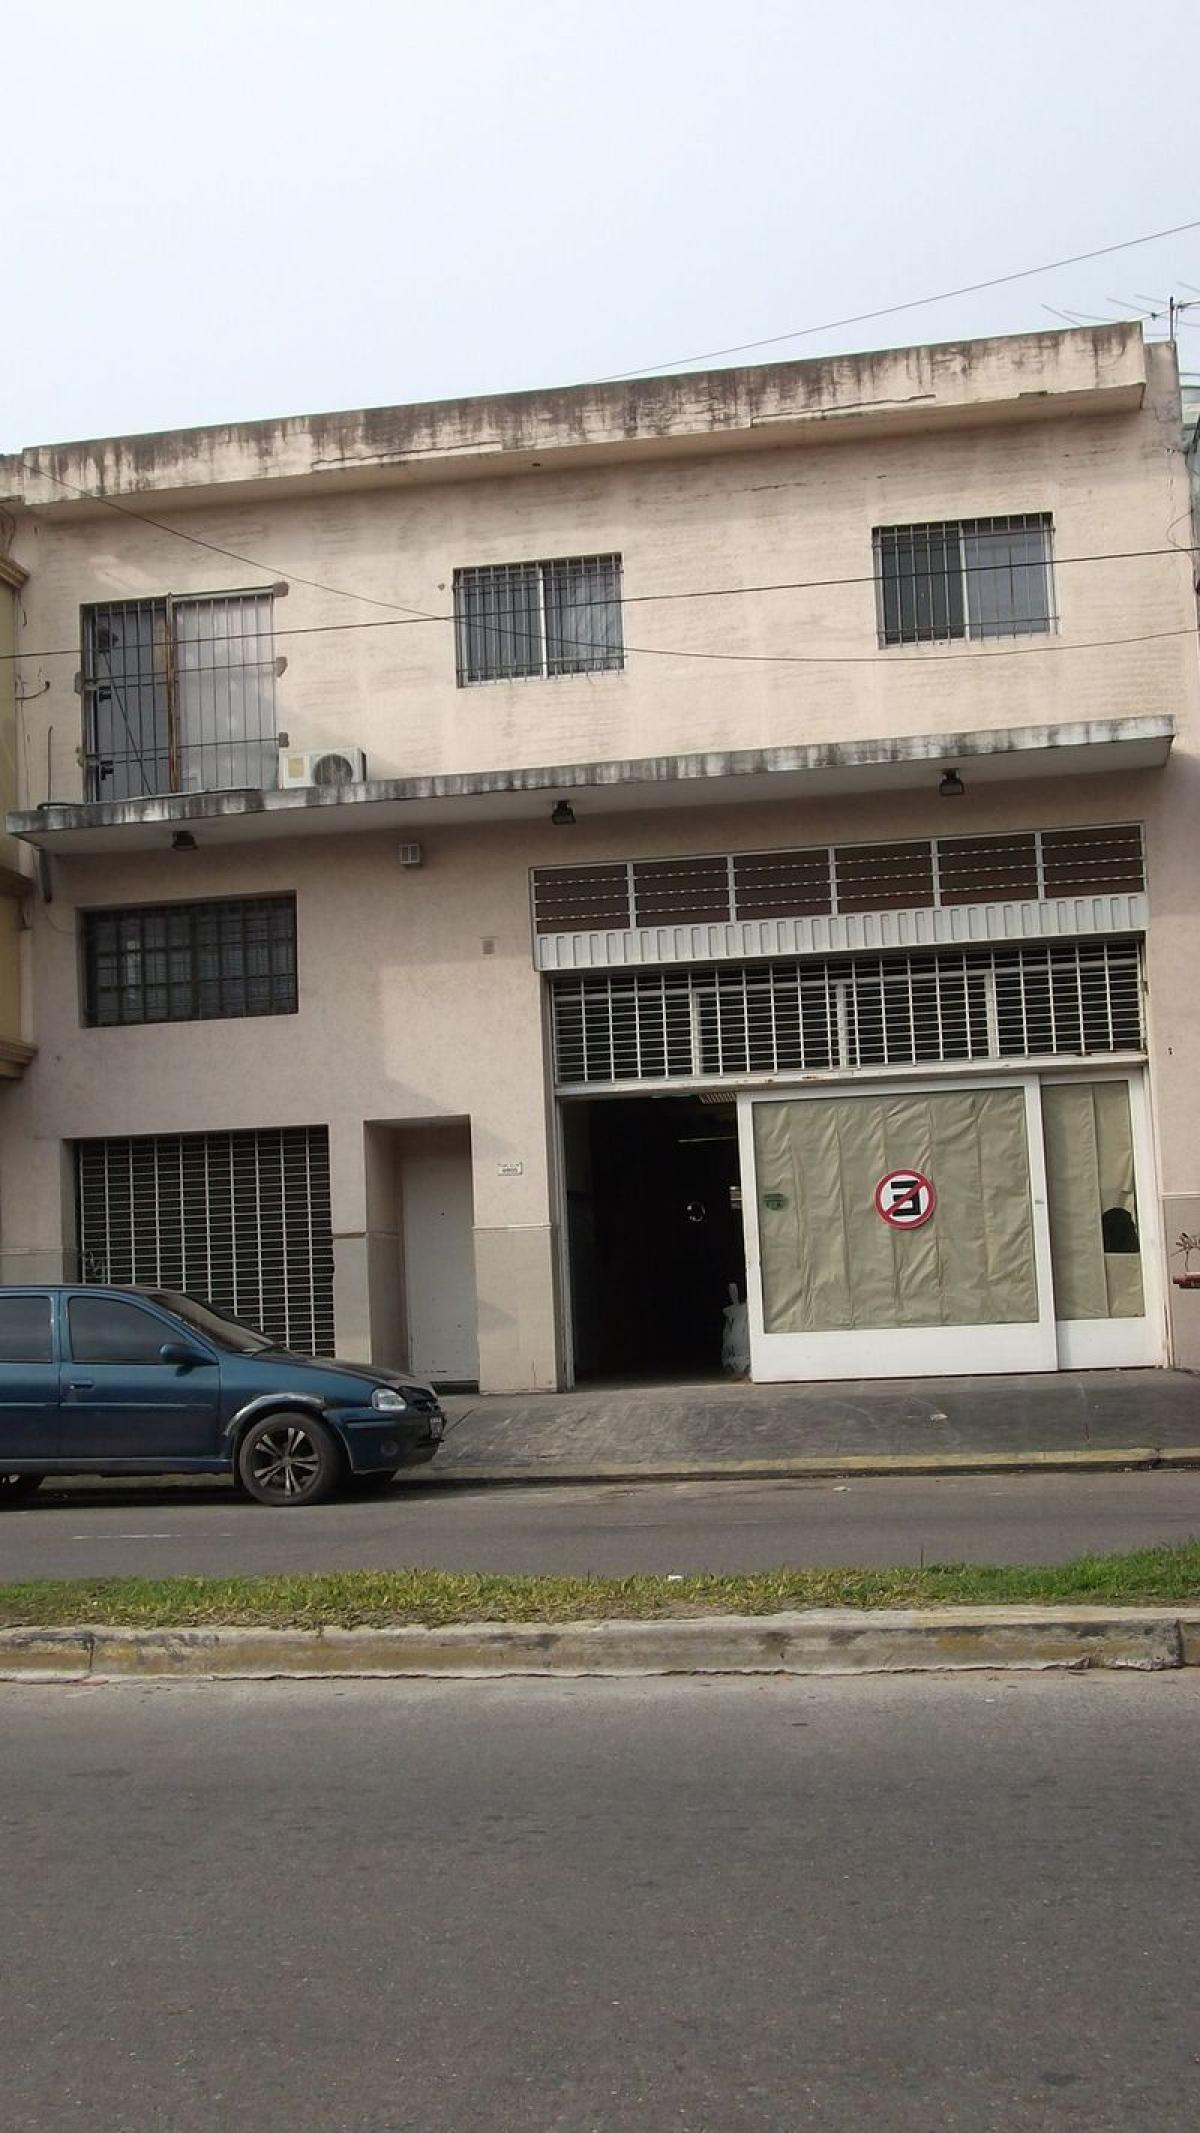 Picture of Apartment Building For Sale in Bs.As. G.B.A. Zona Oeste, Buenos Aires, Argentina